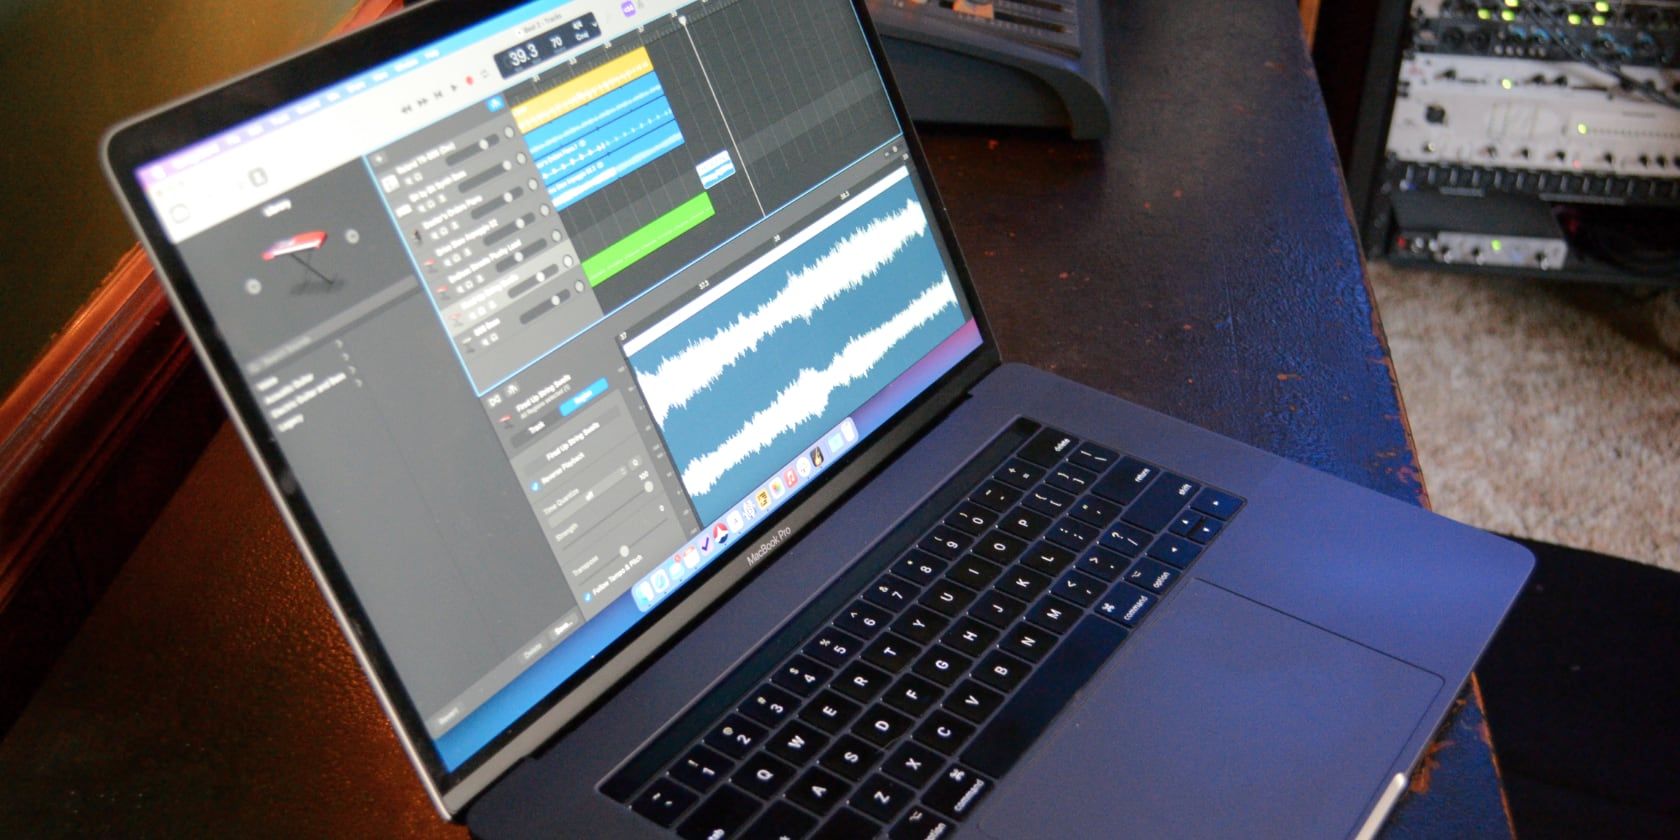 how to make beats on garageband without a keyboard